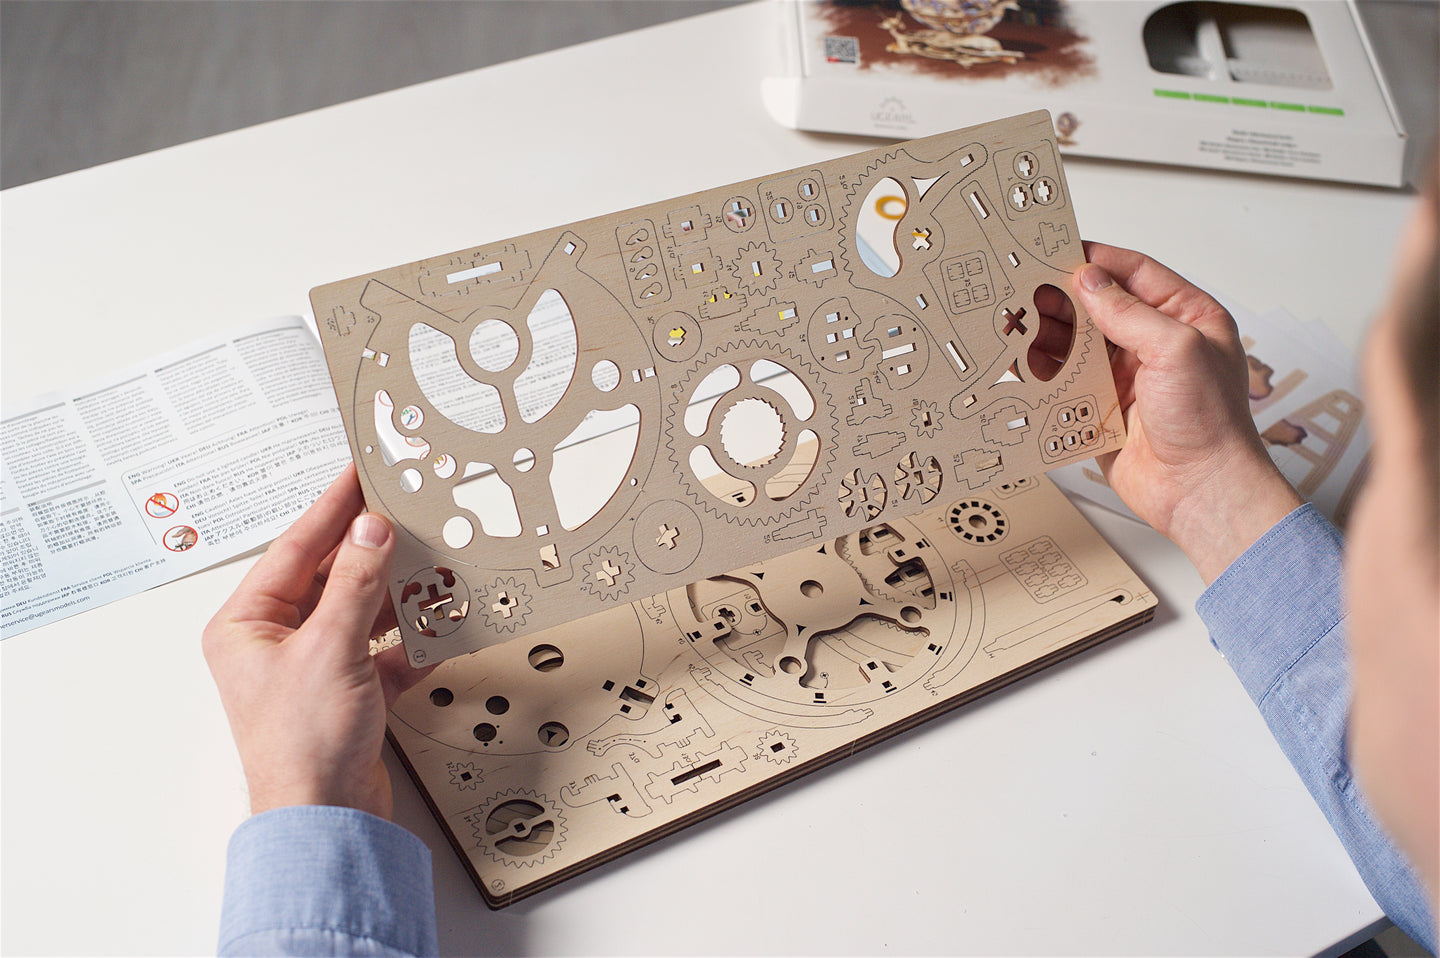 Your Ugears gift certificate